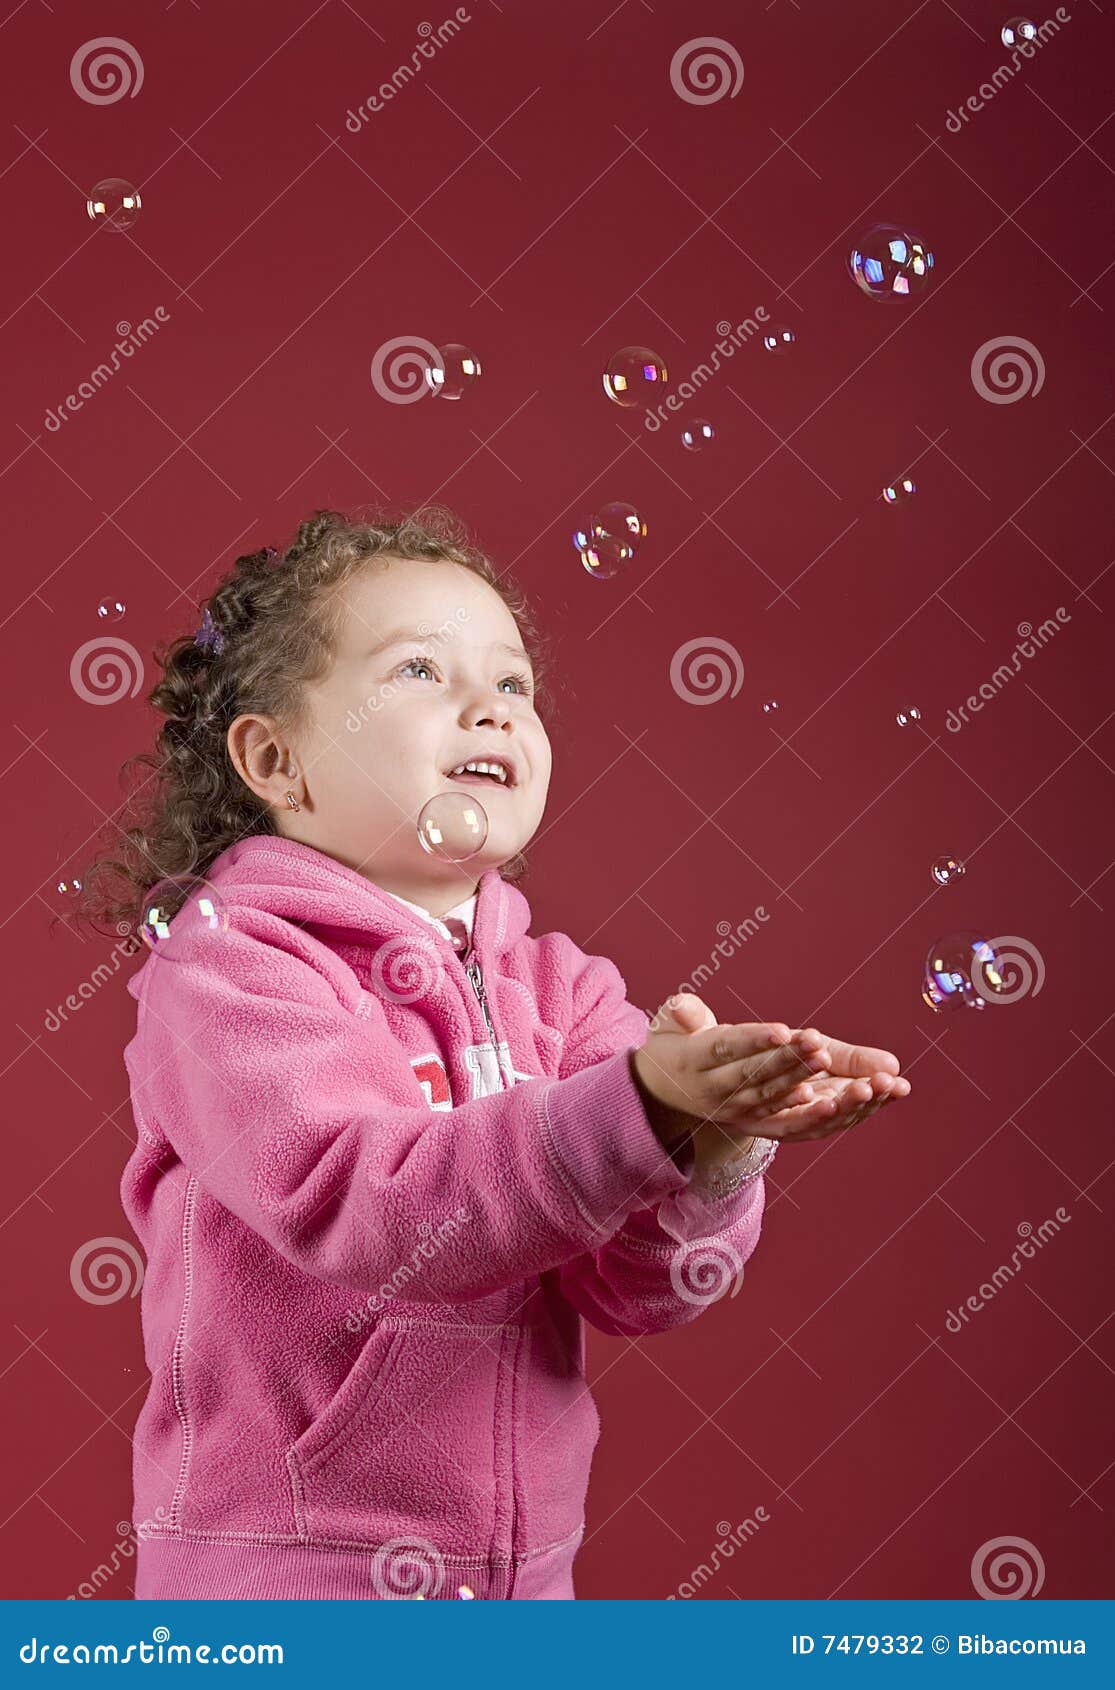 girl catching soap bubbles